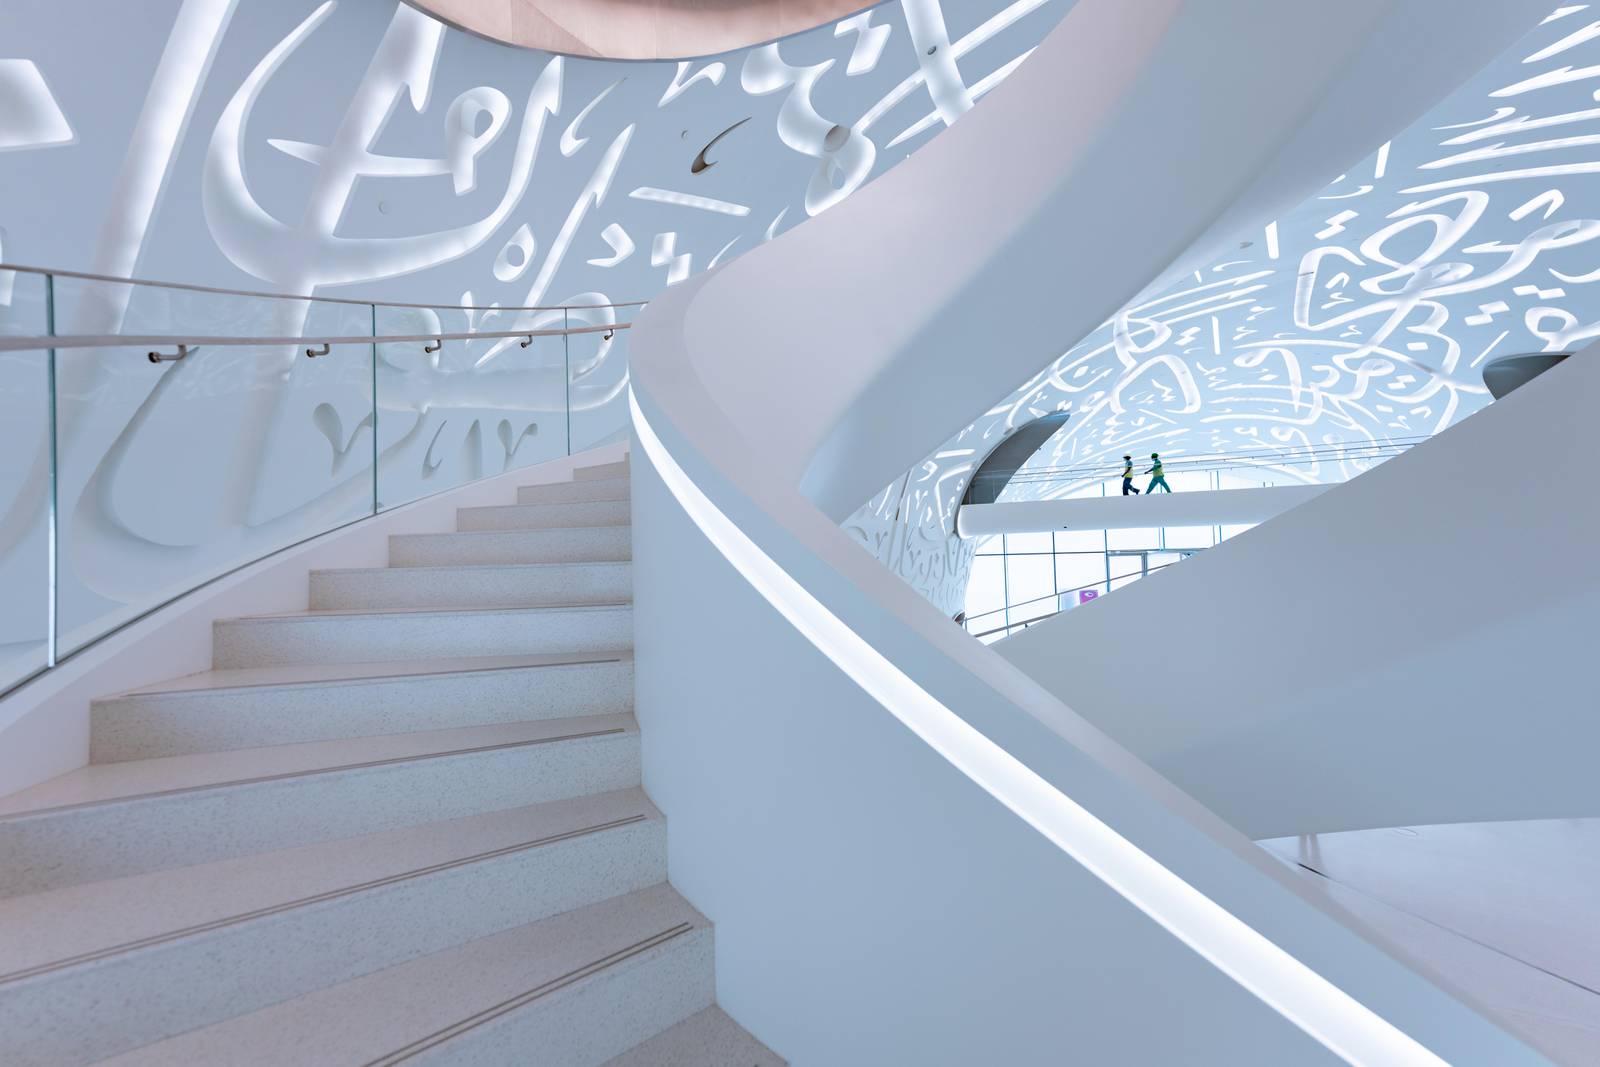 Dubai's Museum of the Future opening date, ticket price and all you